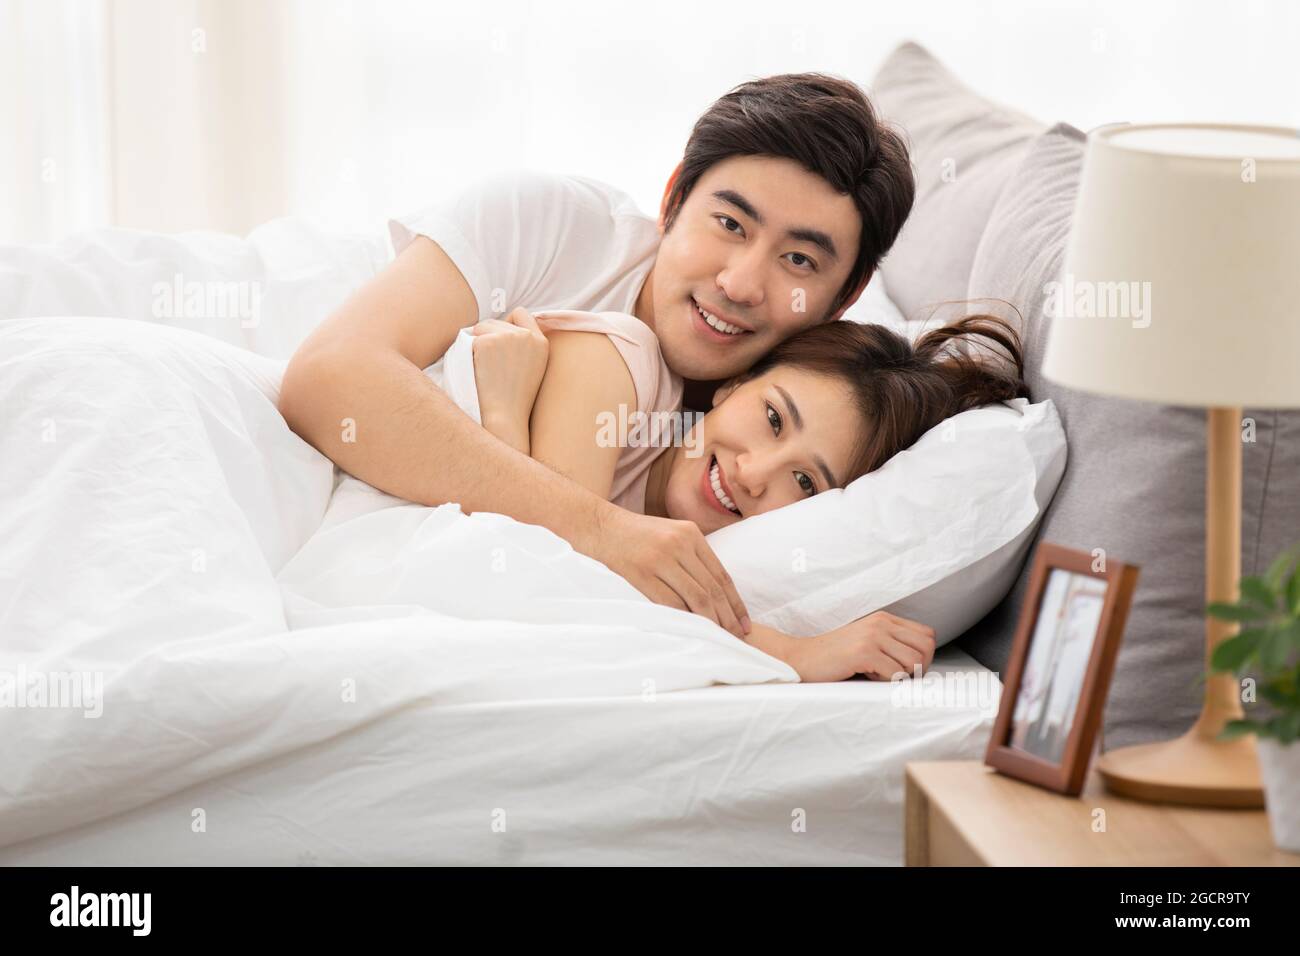 Young couple waking up in bed Stock Photo